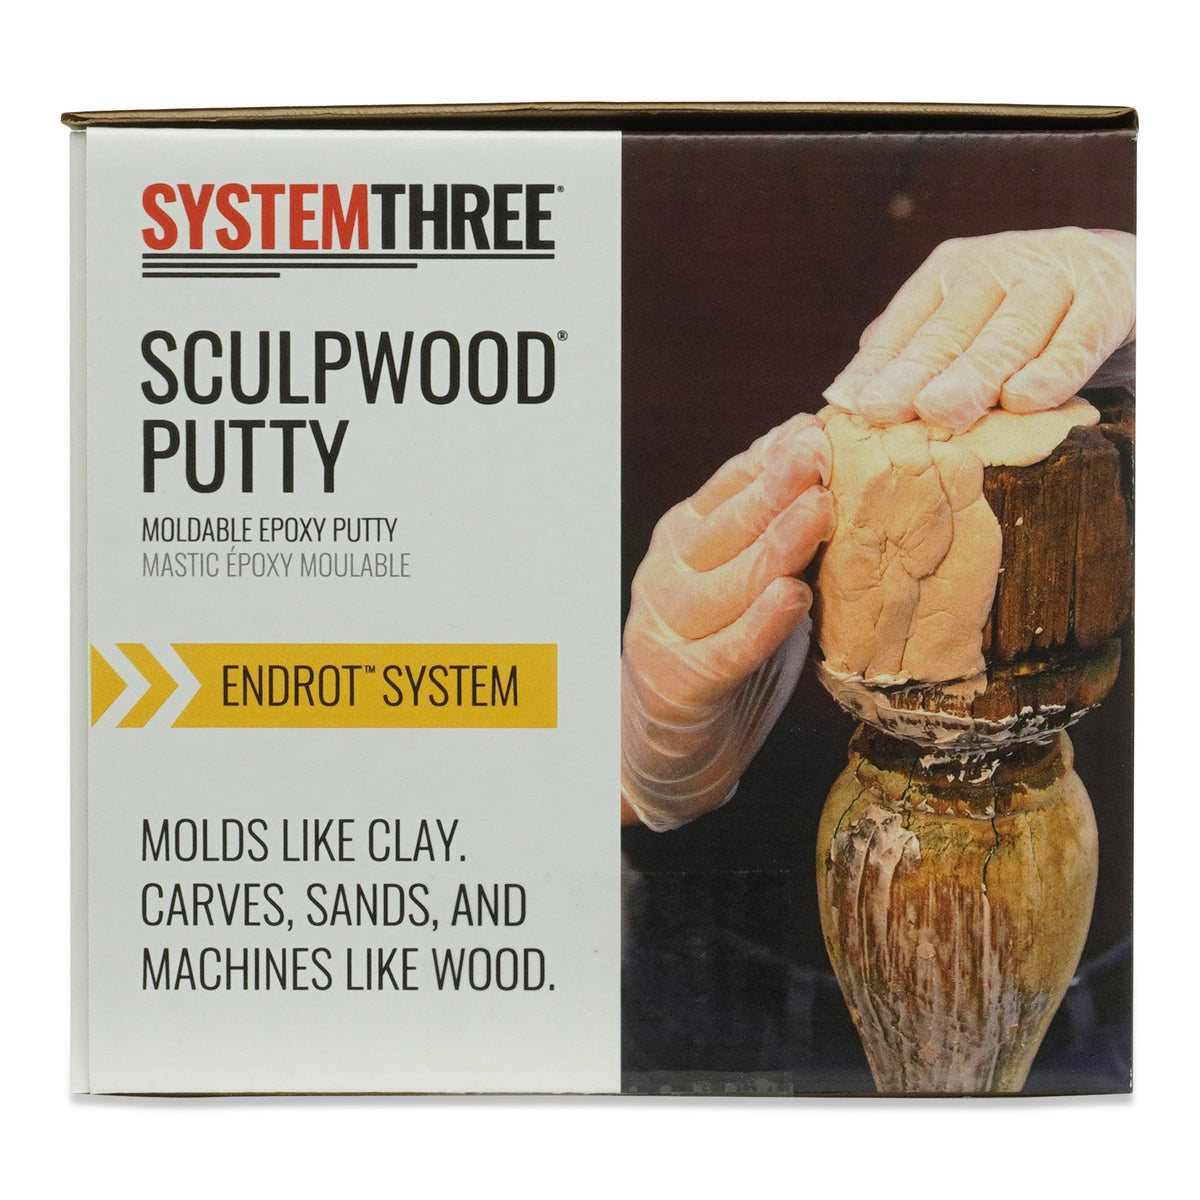 Sculpwood Putty | Moldable Epoxy Wood Filler Putty - System Three